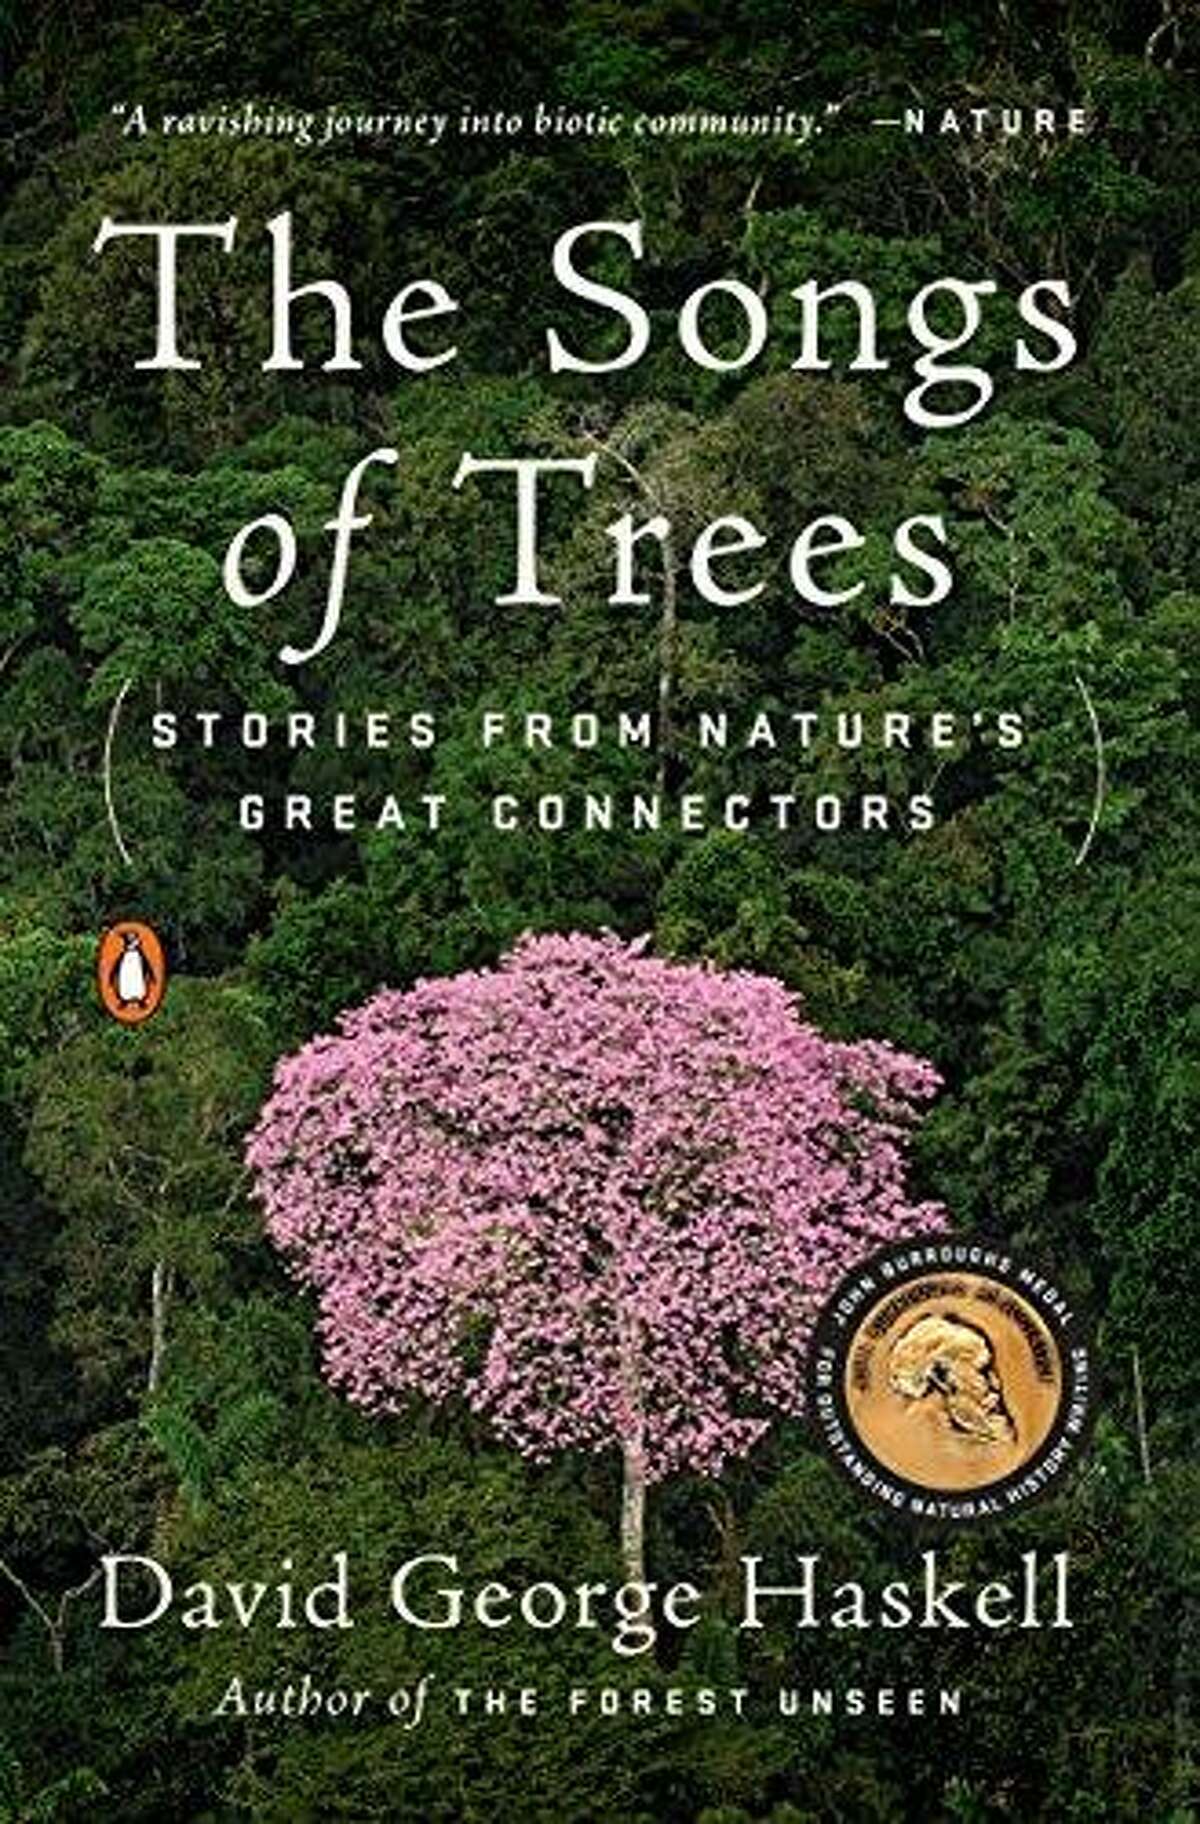 “The Songs of Trees,” by David George Haskell, Penguin Books, $17